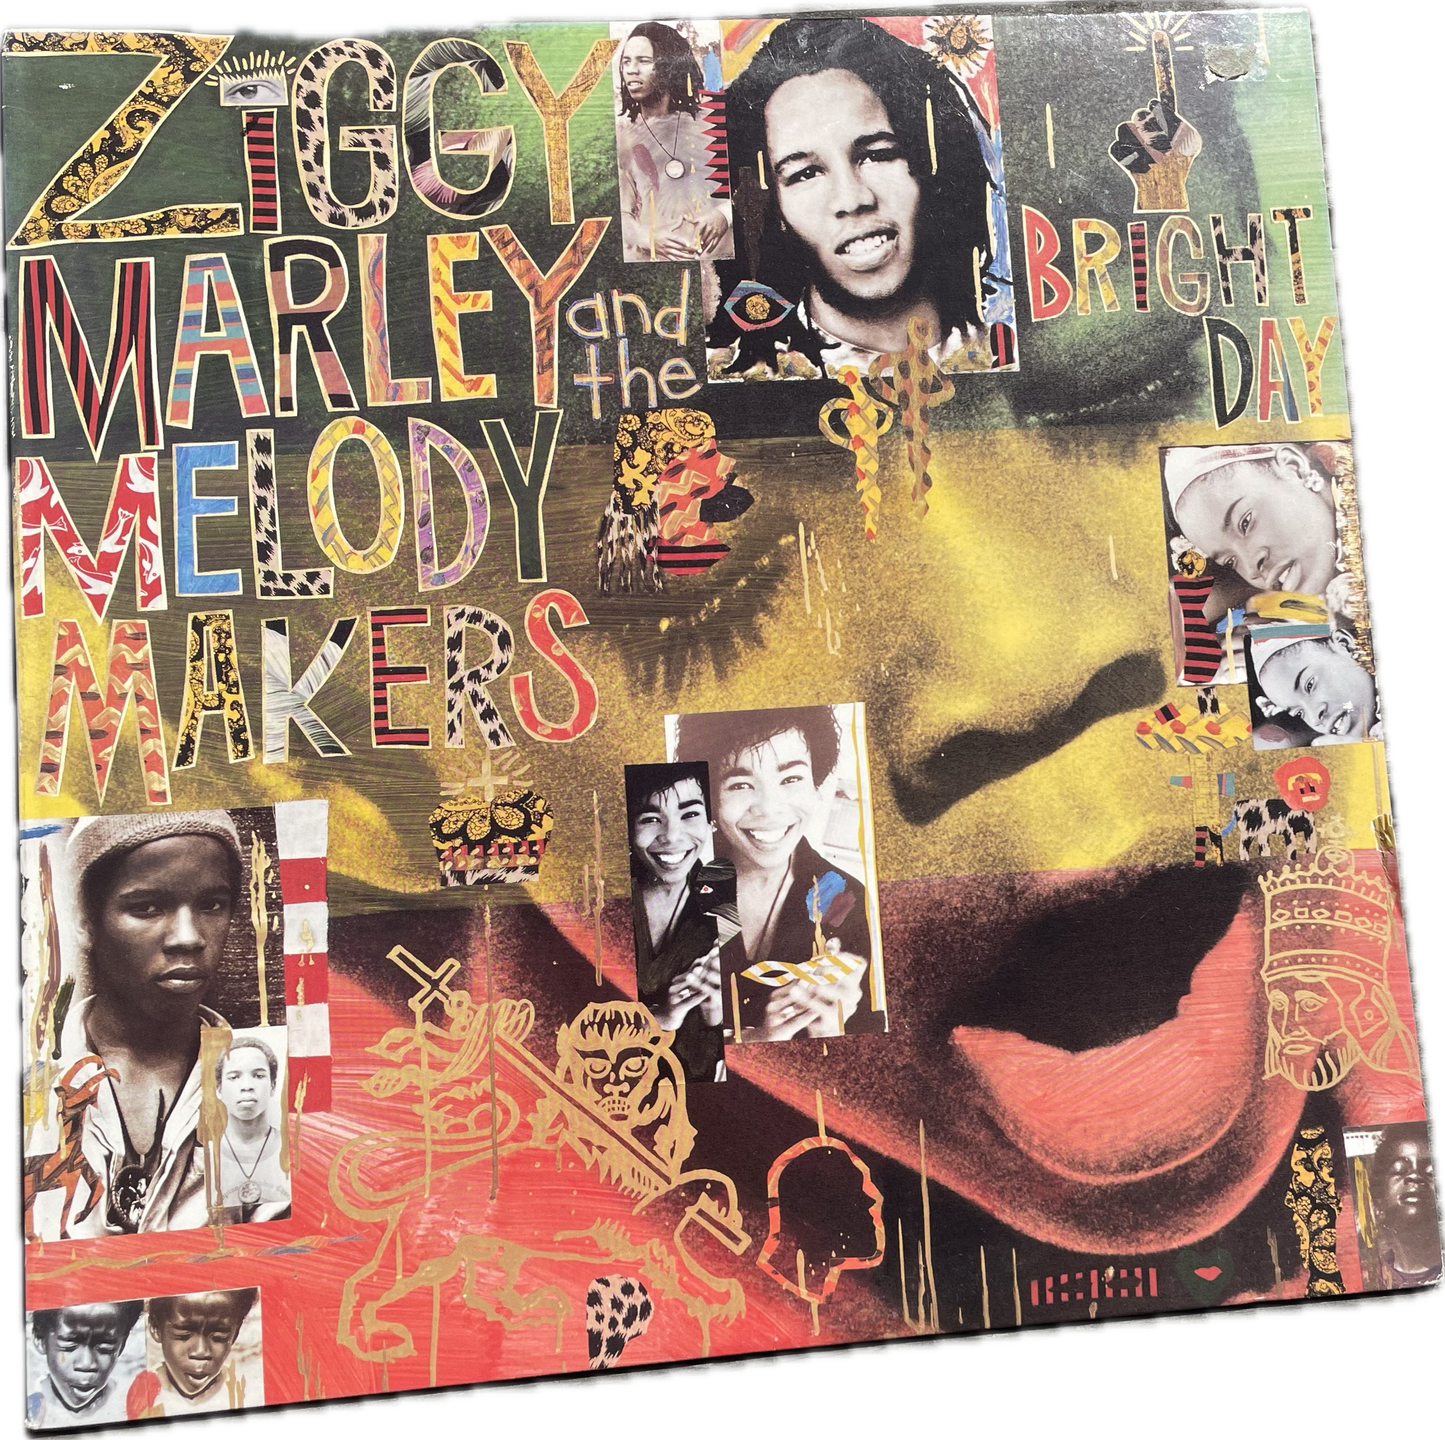 G G ZIGGY MARLEY AND THE MELODY MAKERS BRIGHT DAY 1989 VIRGIN 1-91256 (VINTAGE)